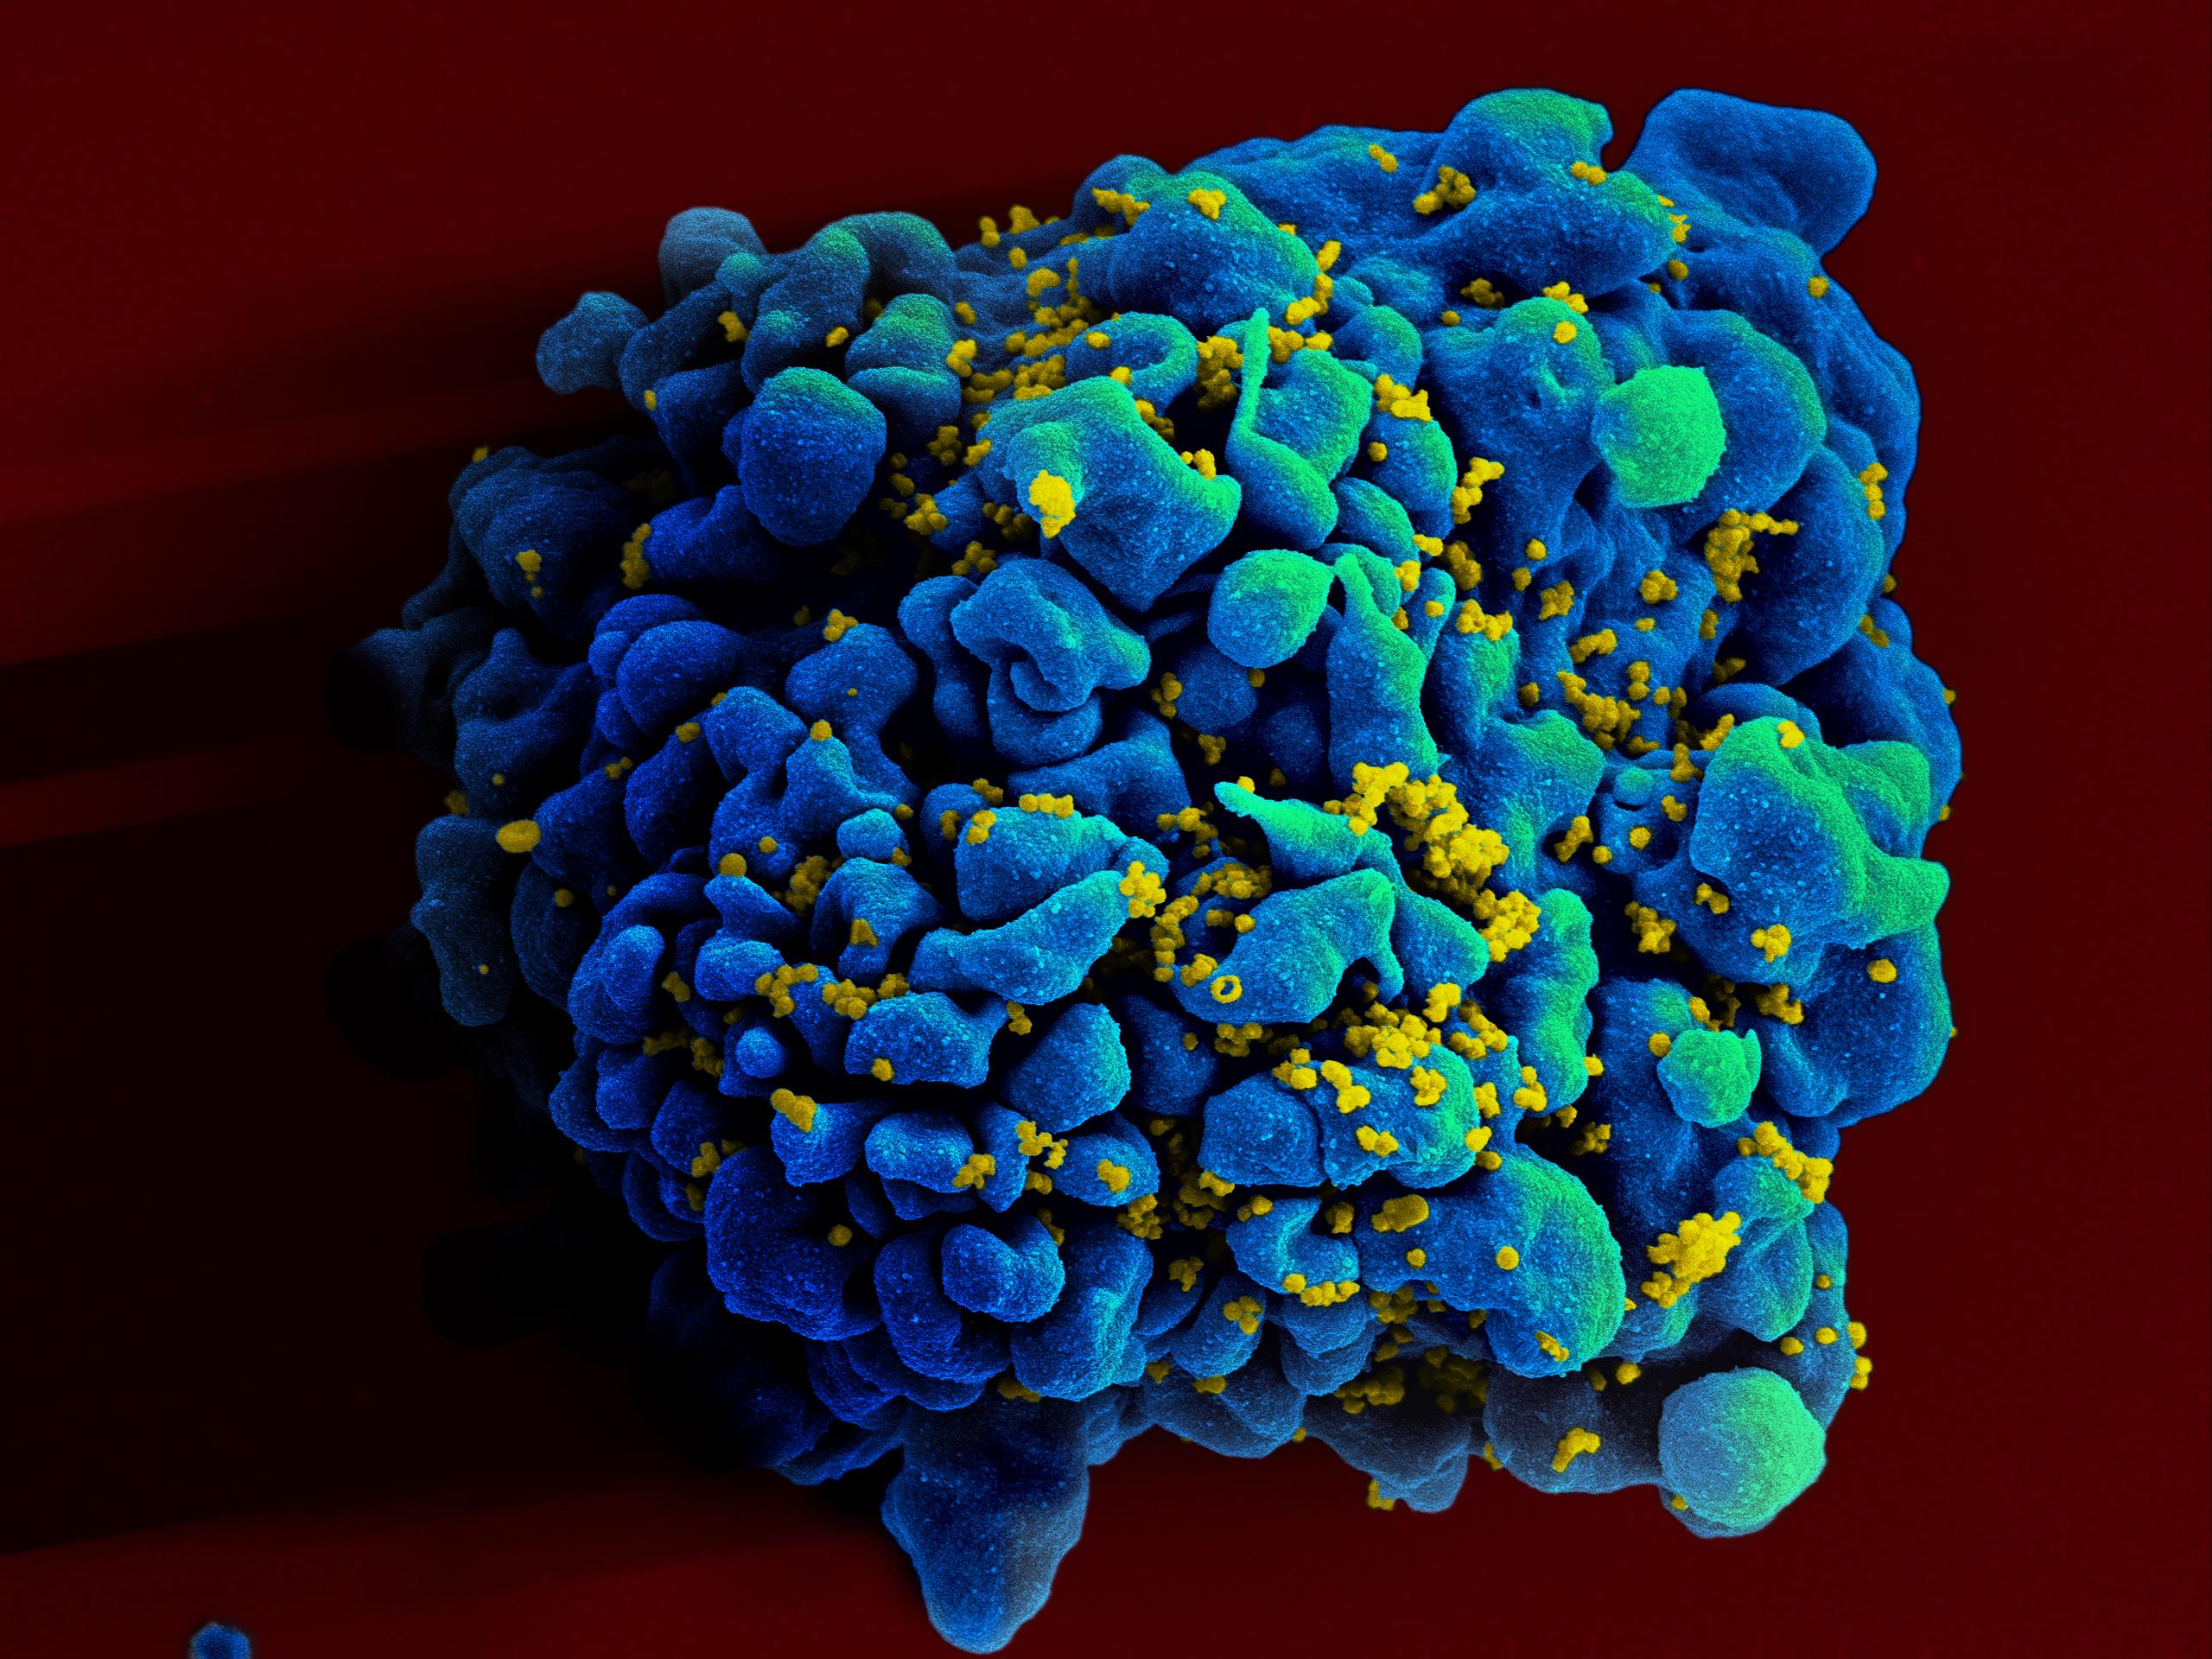 If the research teams manage to reproduce a response that produces antibodies against all strains of HIV, they could create a universal vaccine.